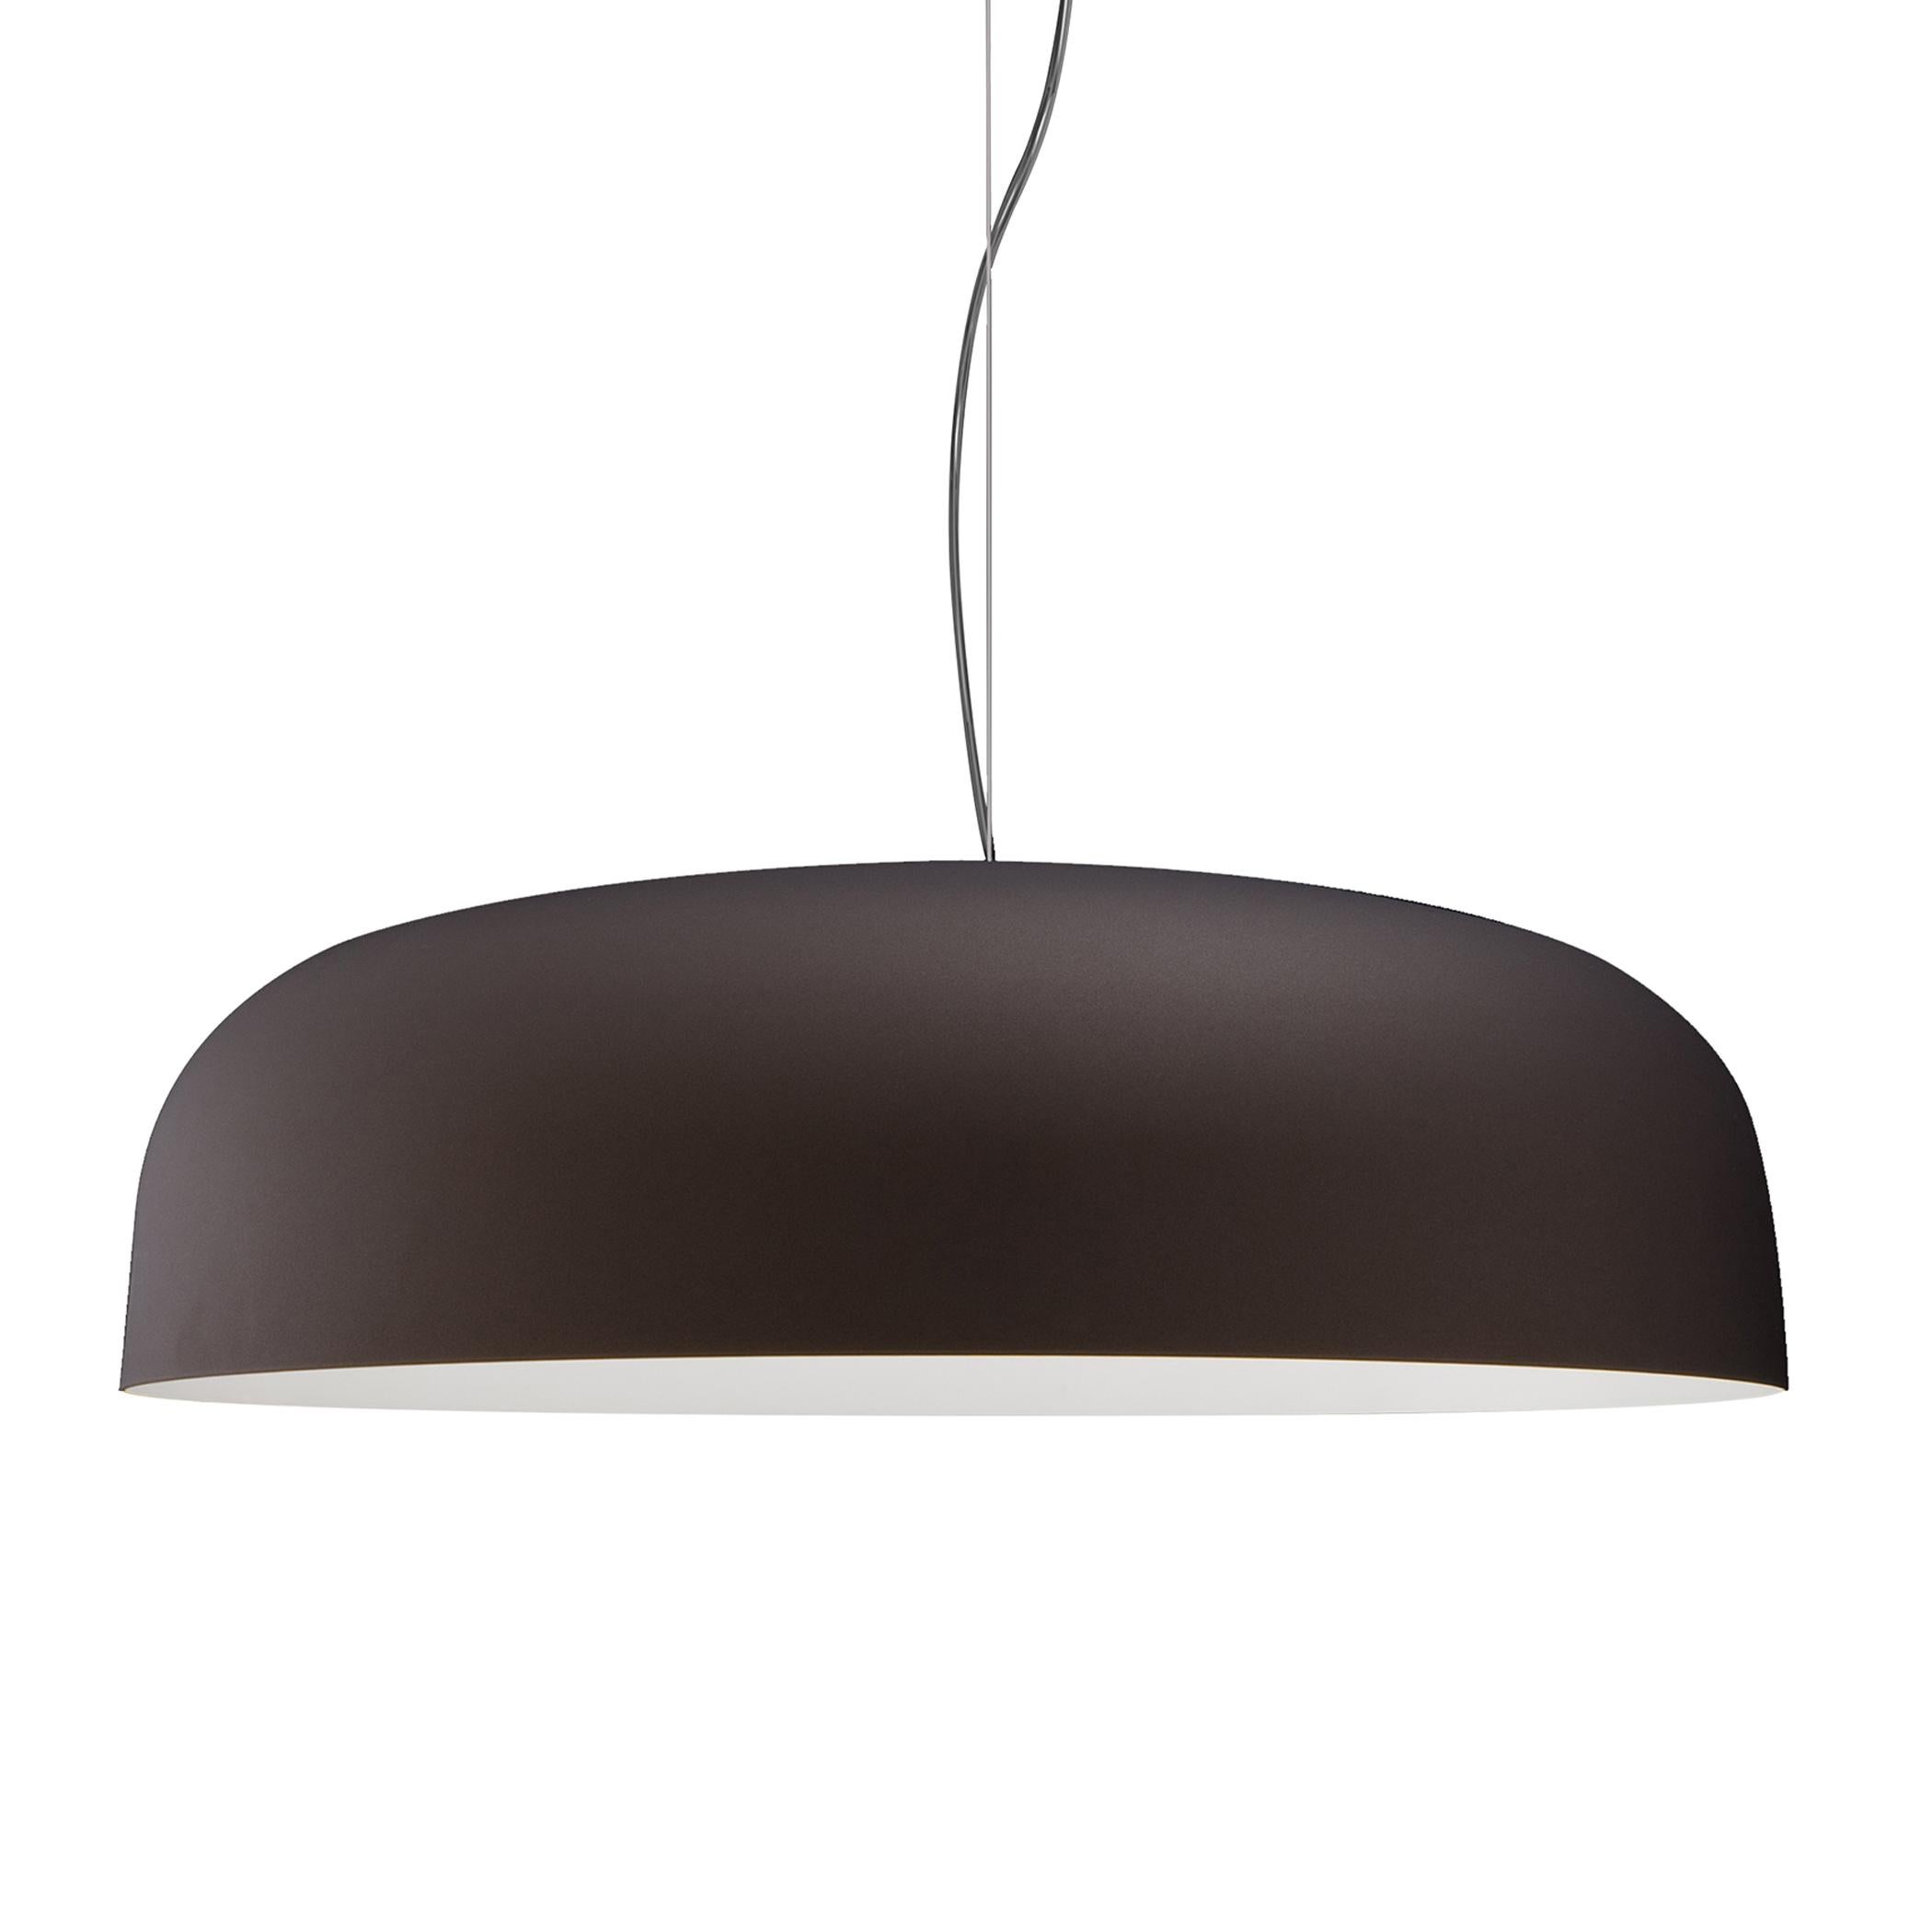 Mid-Century Modern Francesco Rota Suspension Lamp 'Canopy' 422 Bronze and White by Oluce